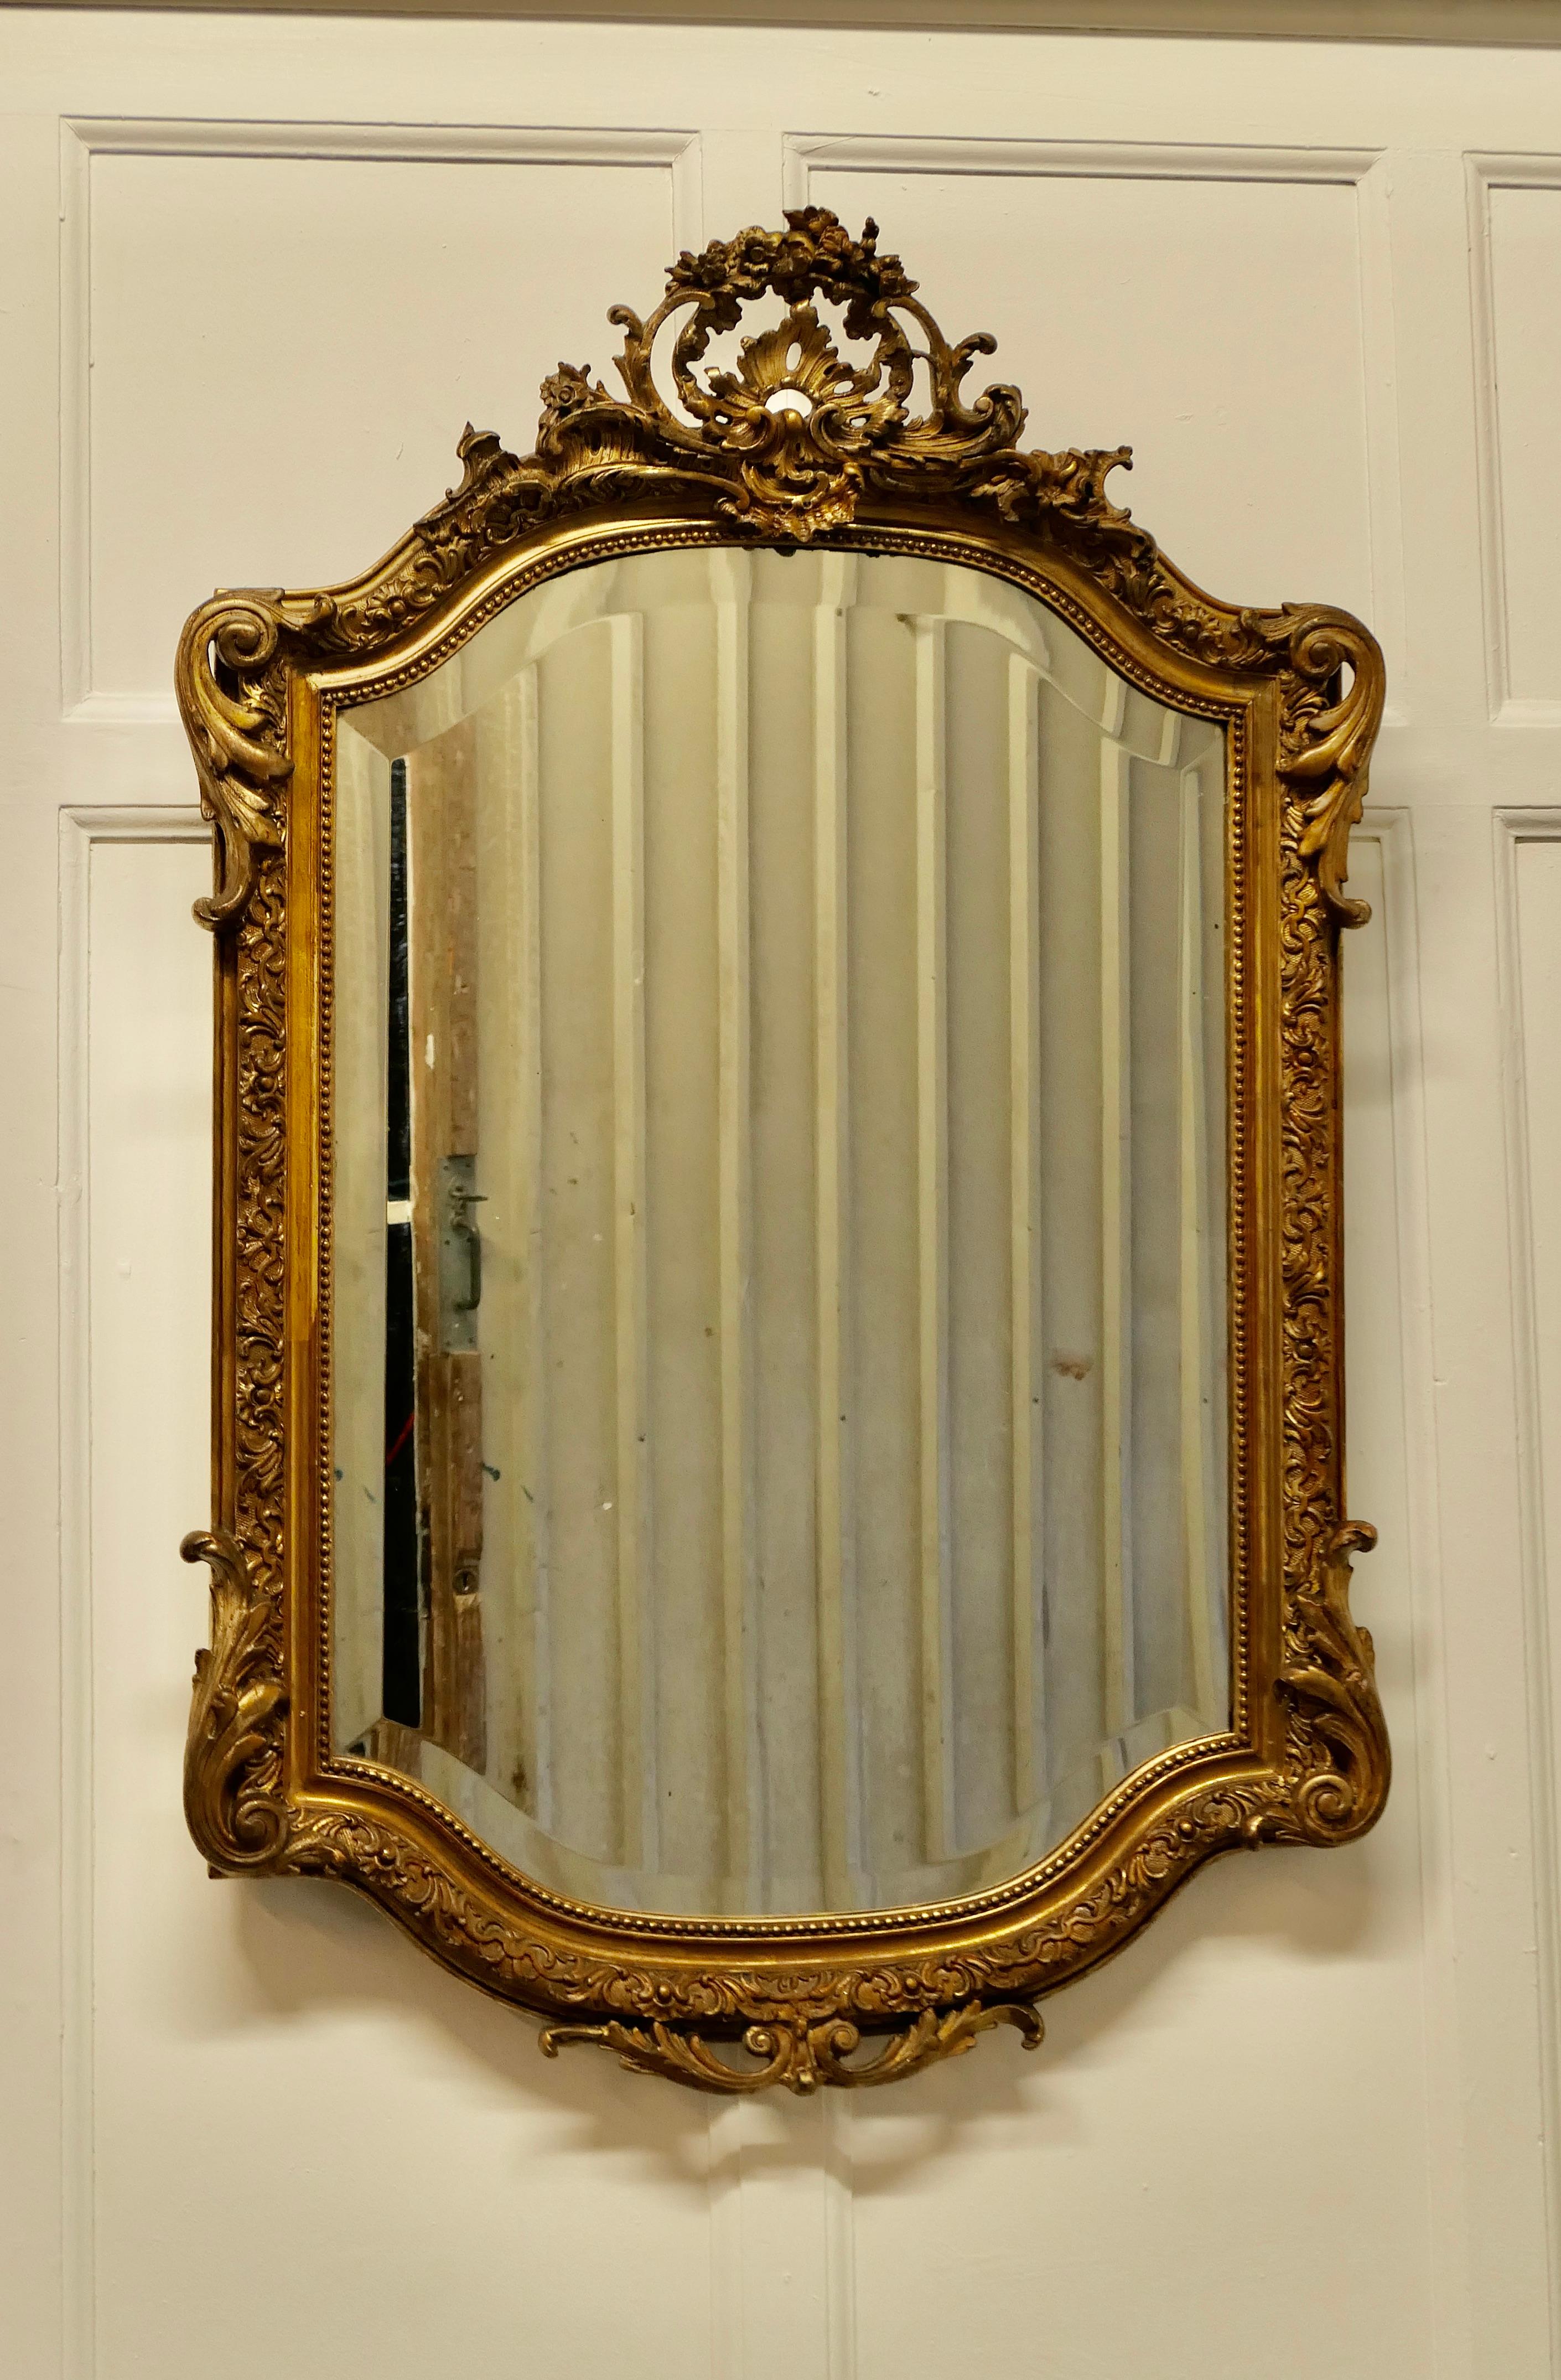 Superb 19th century French gilt pier mirror 

This is a beautifully decorative gold frame mirror it is an unusual shape with gilded carving, a large and intricate piece with a pierced shell and floral decoration at the top and a very attractive